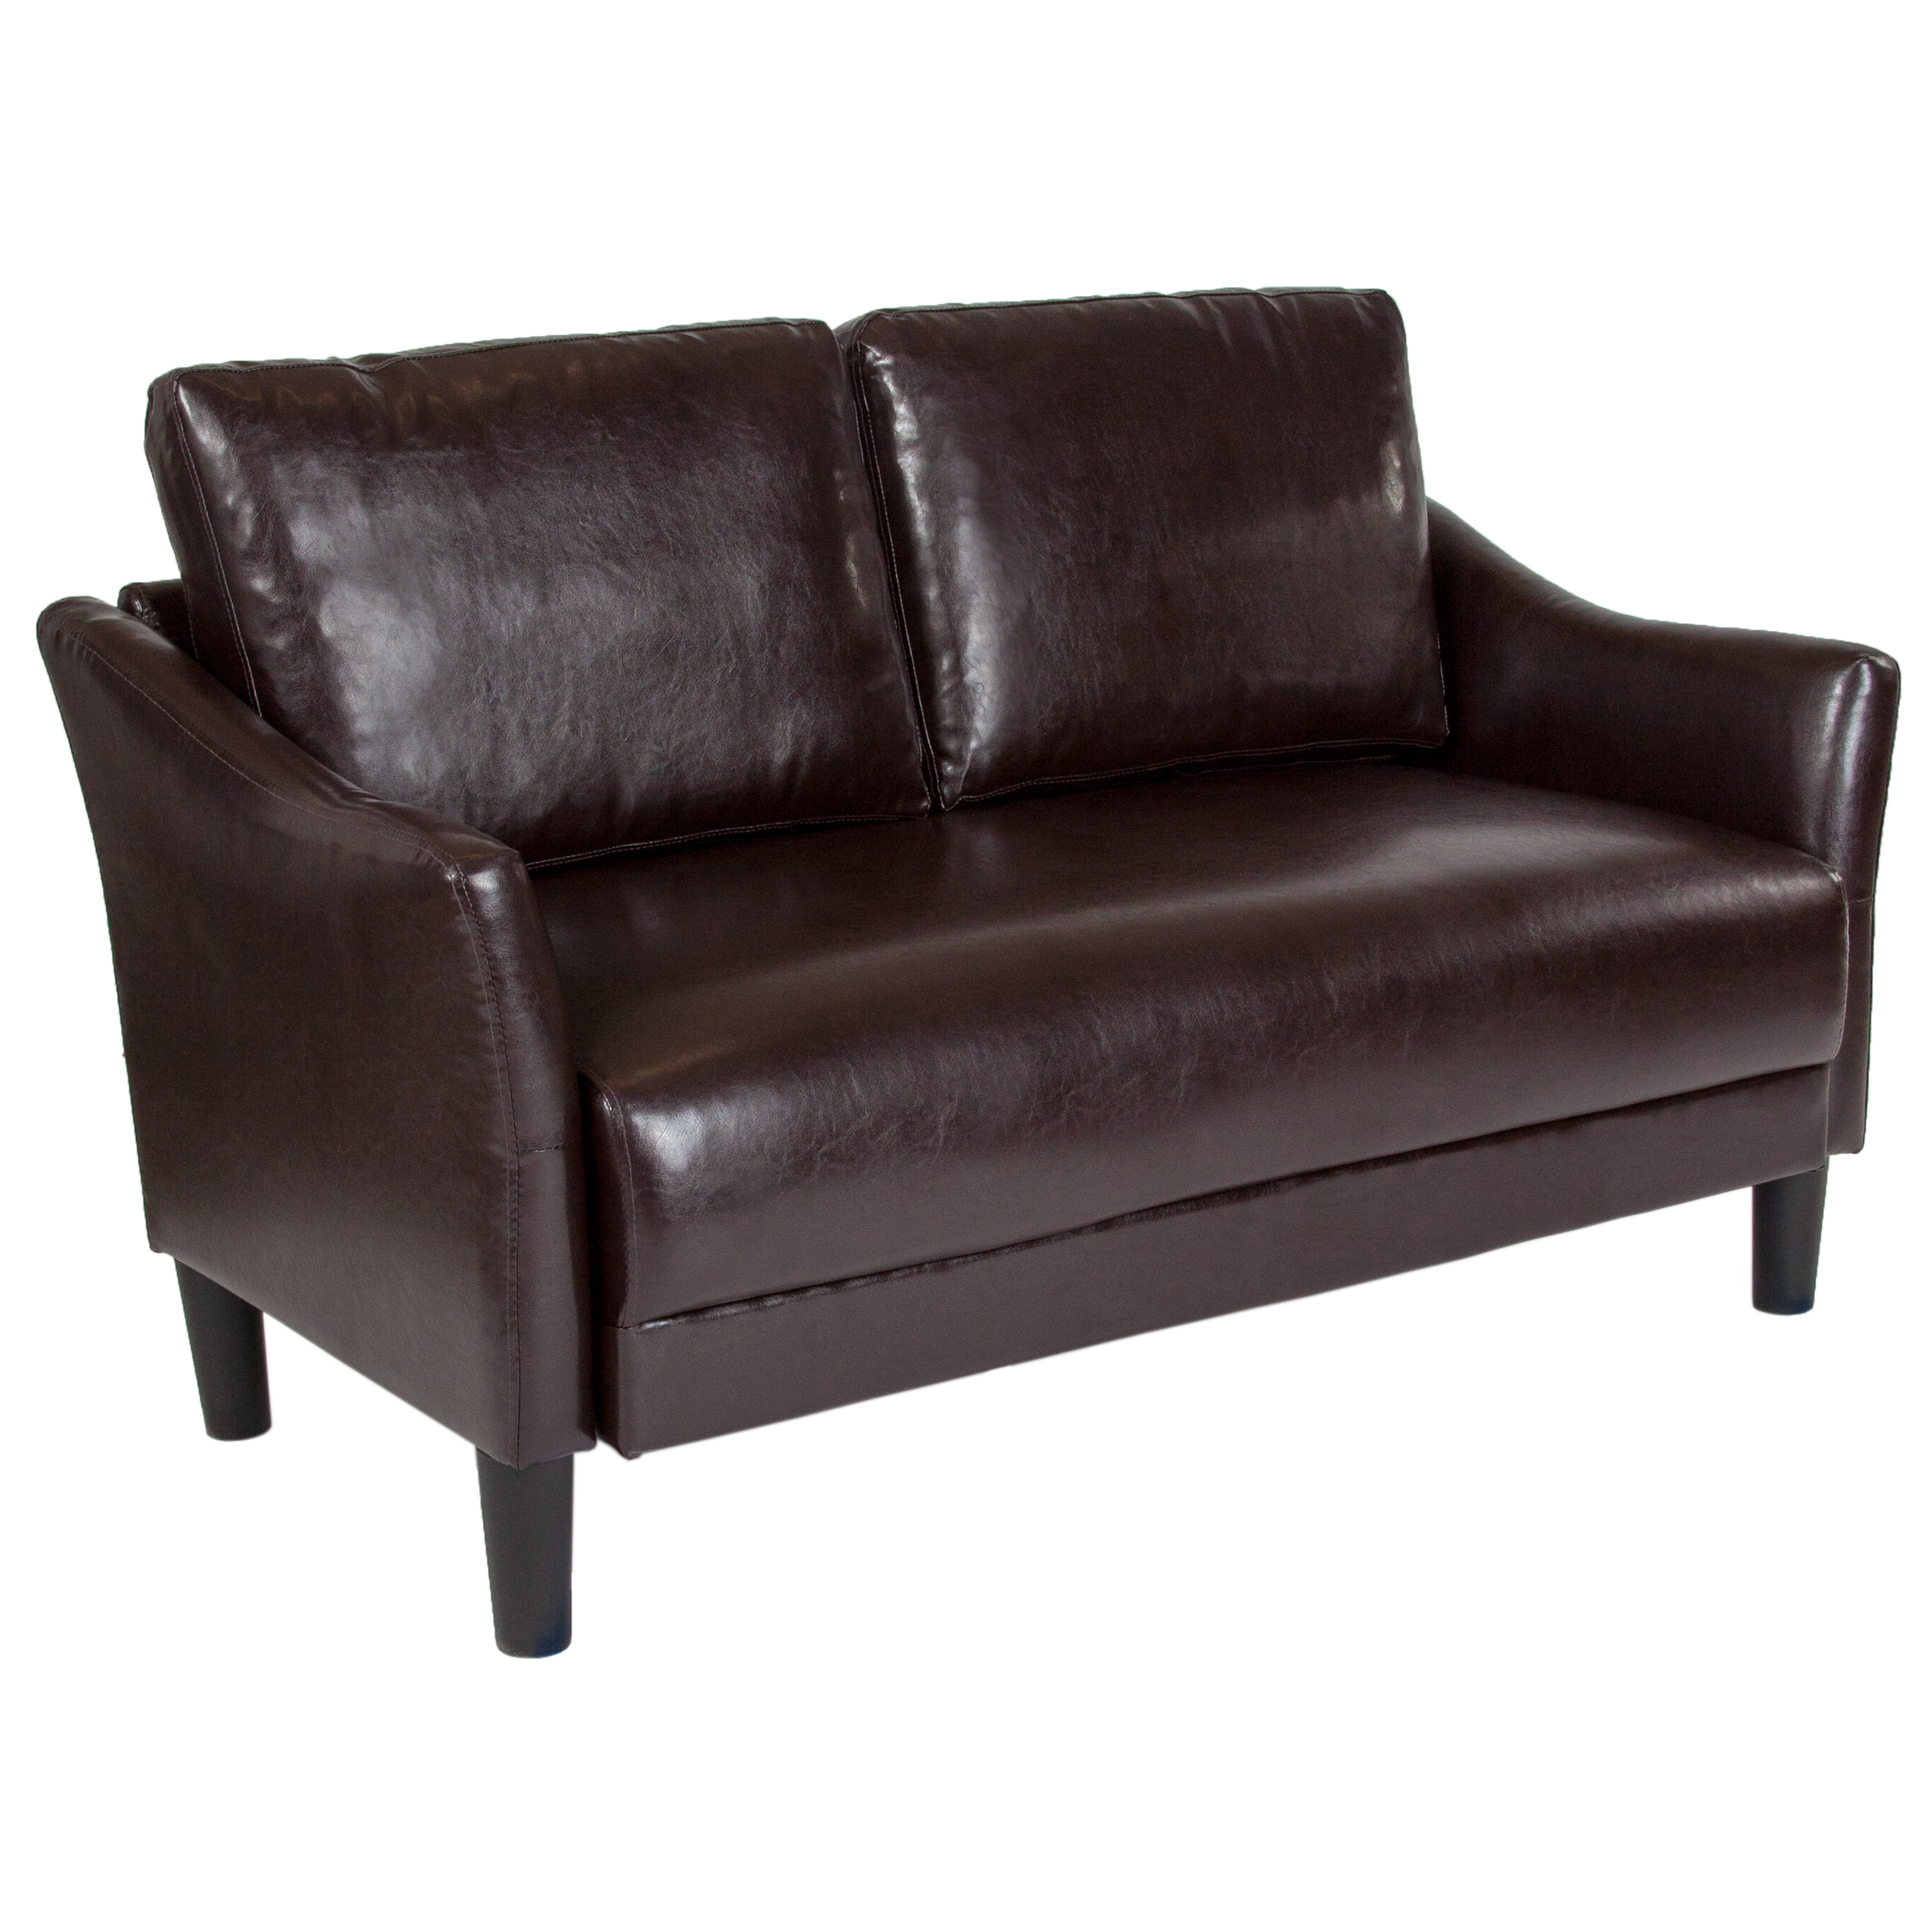 Flash Furniture Asti Upholstered Loveseat in Brown LeatherSoft - image 1 of 5